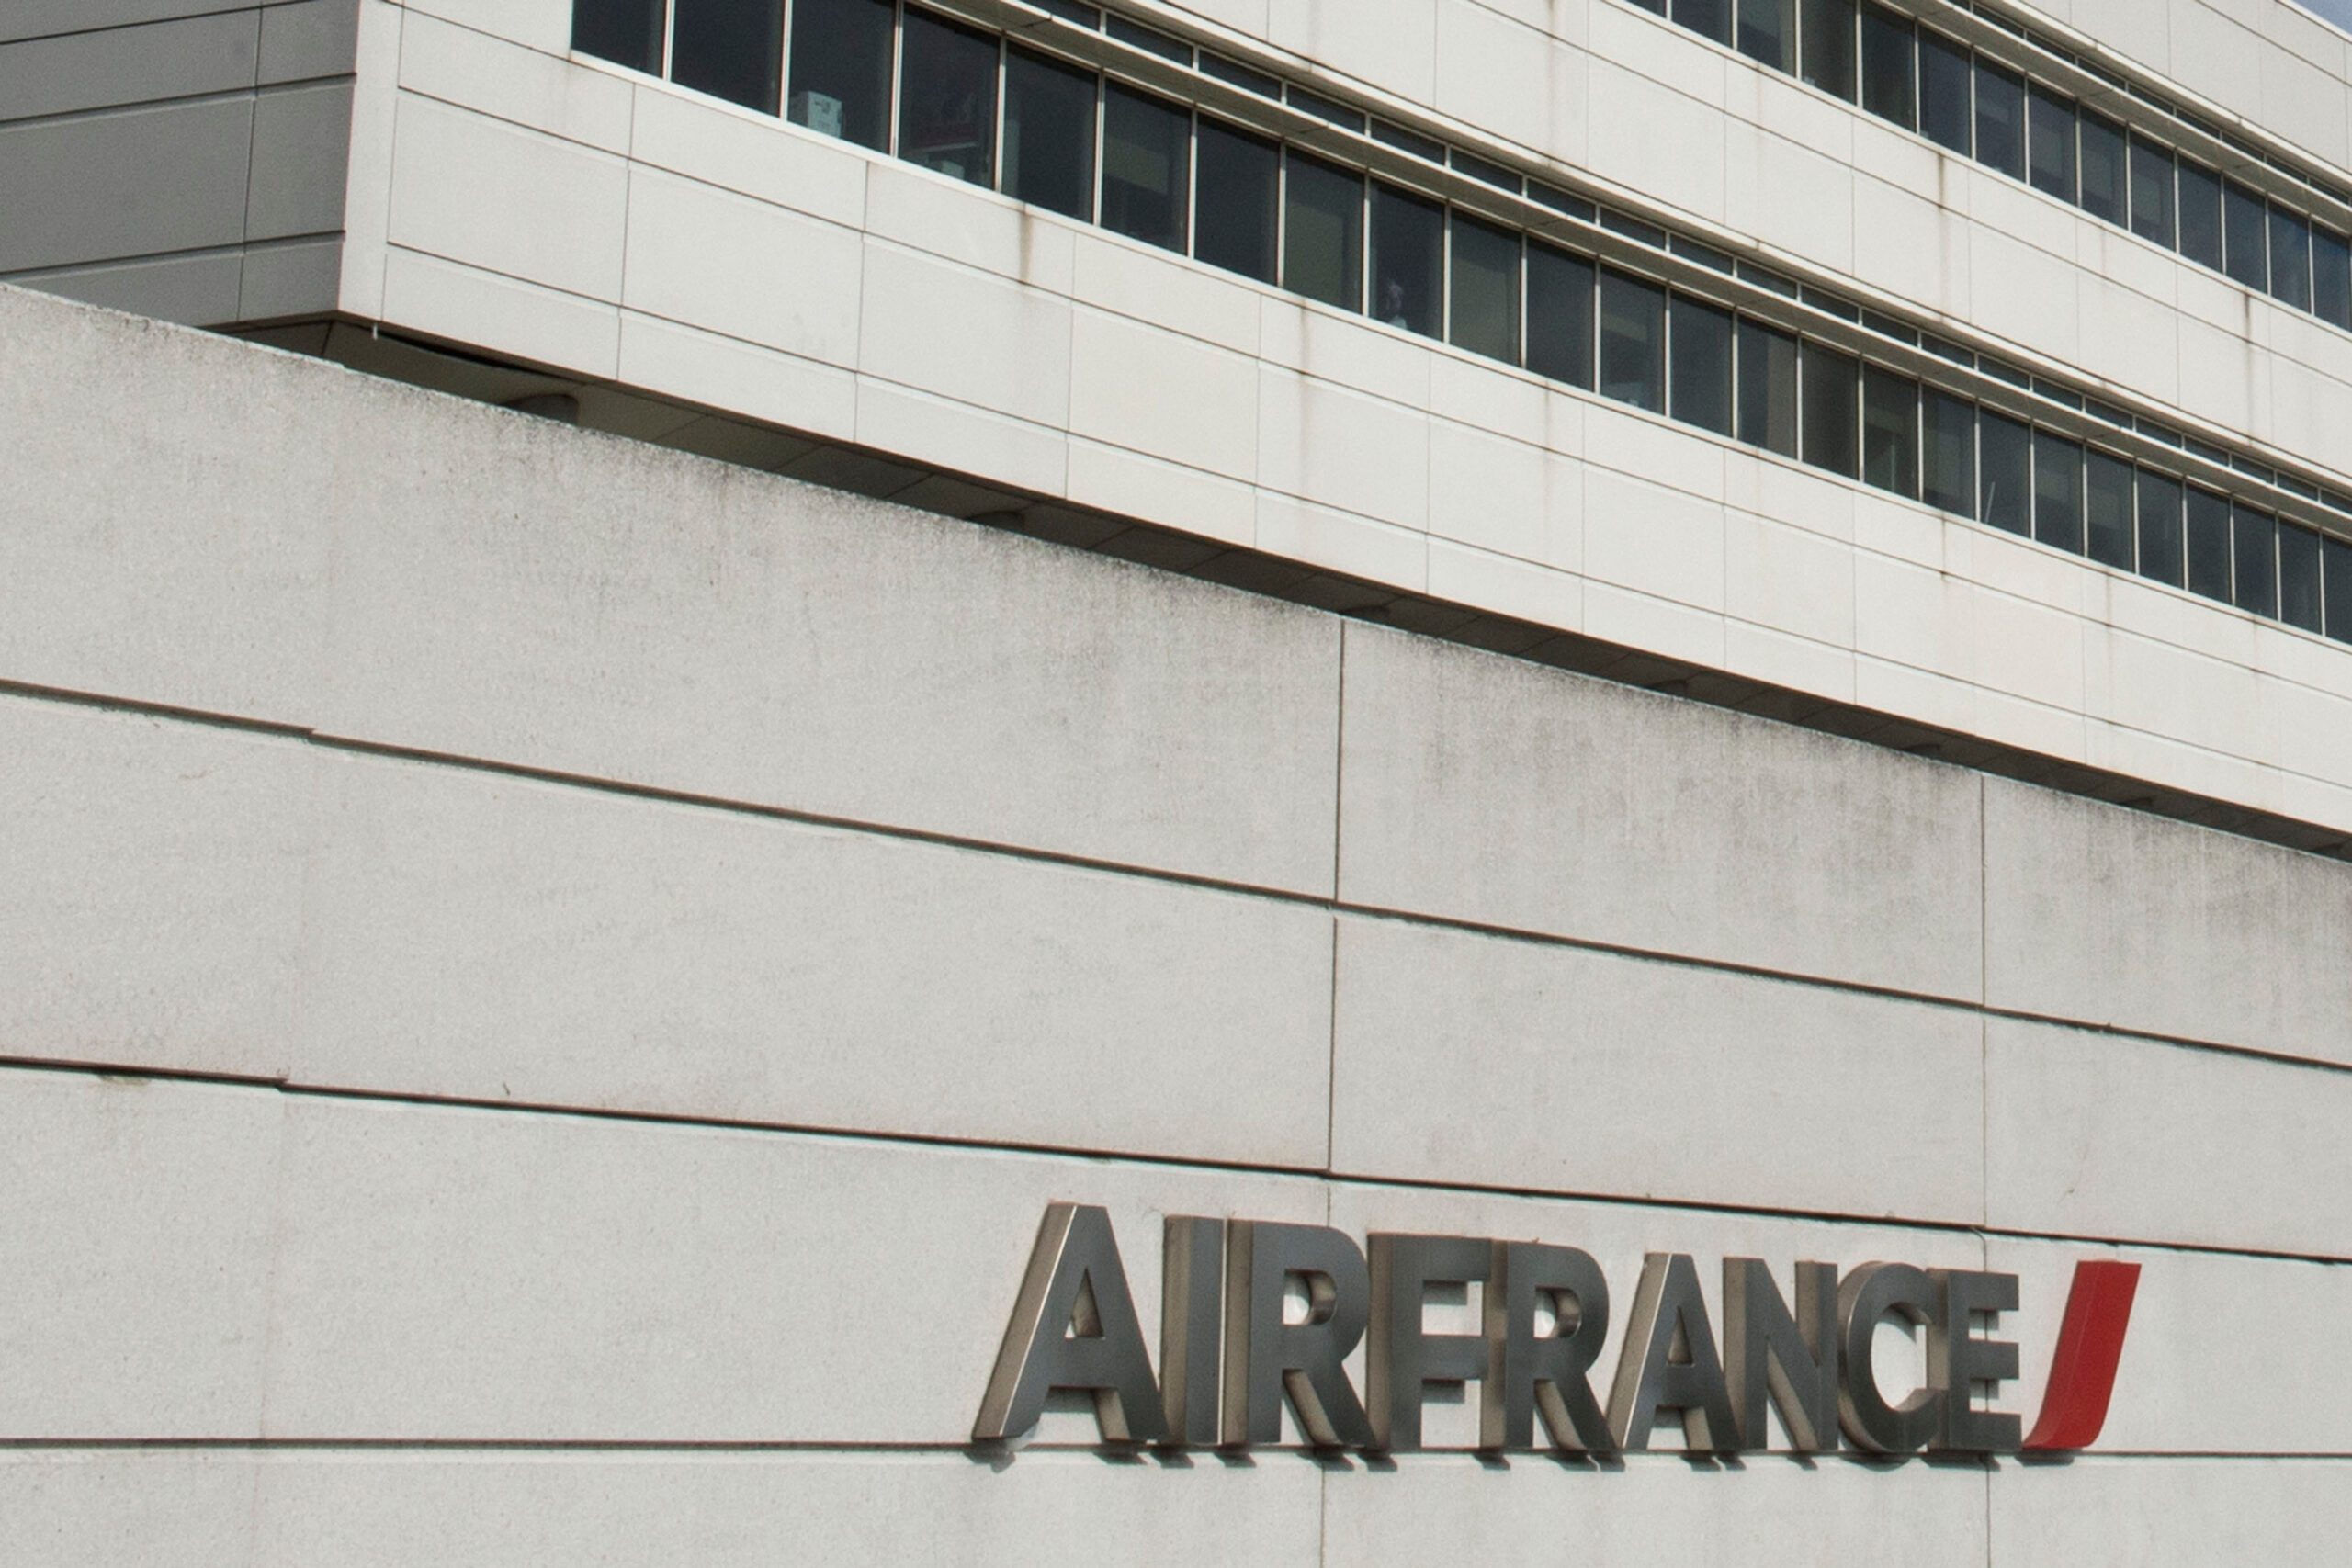 ‘Mouse’ grounds Air France flight